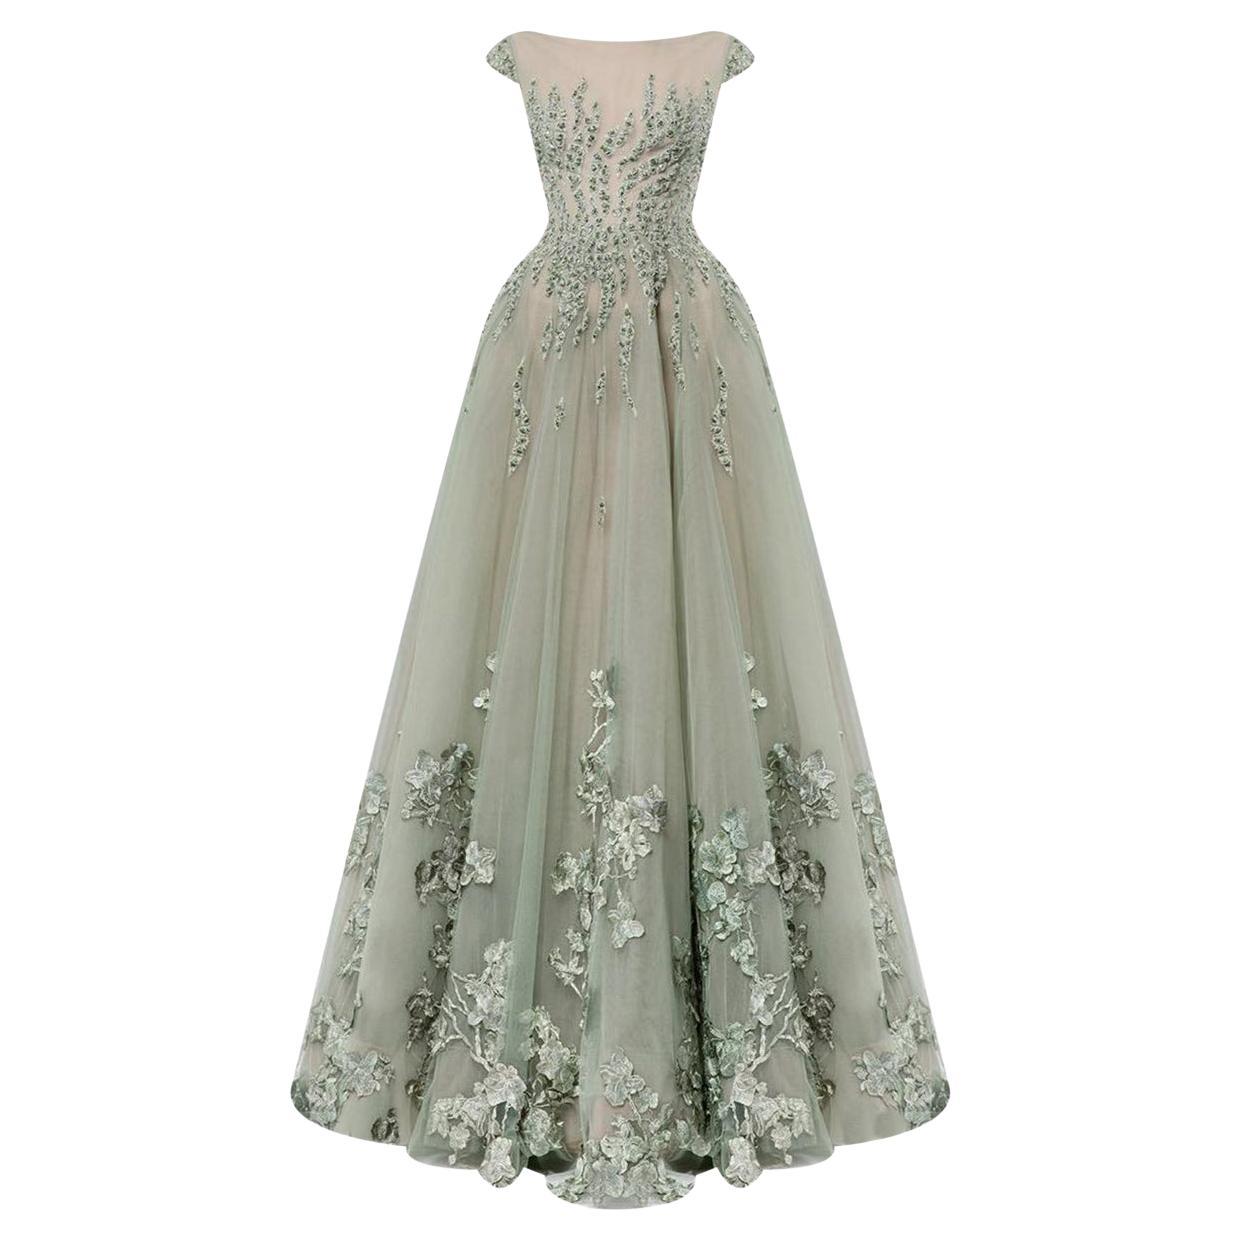 TONY WARD OLIVE COLOR BALL GOWN DRESS Size 40